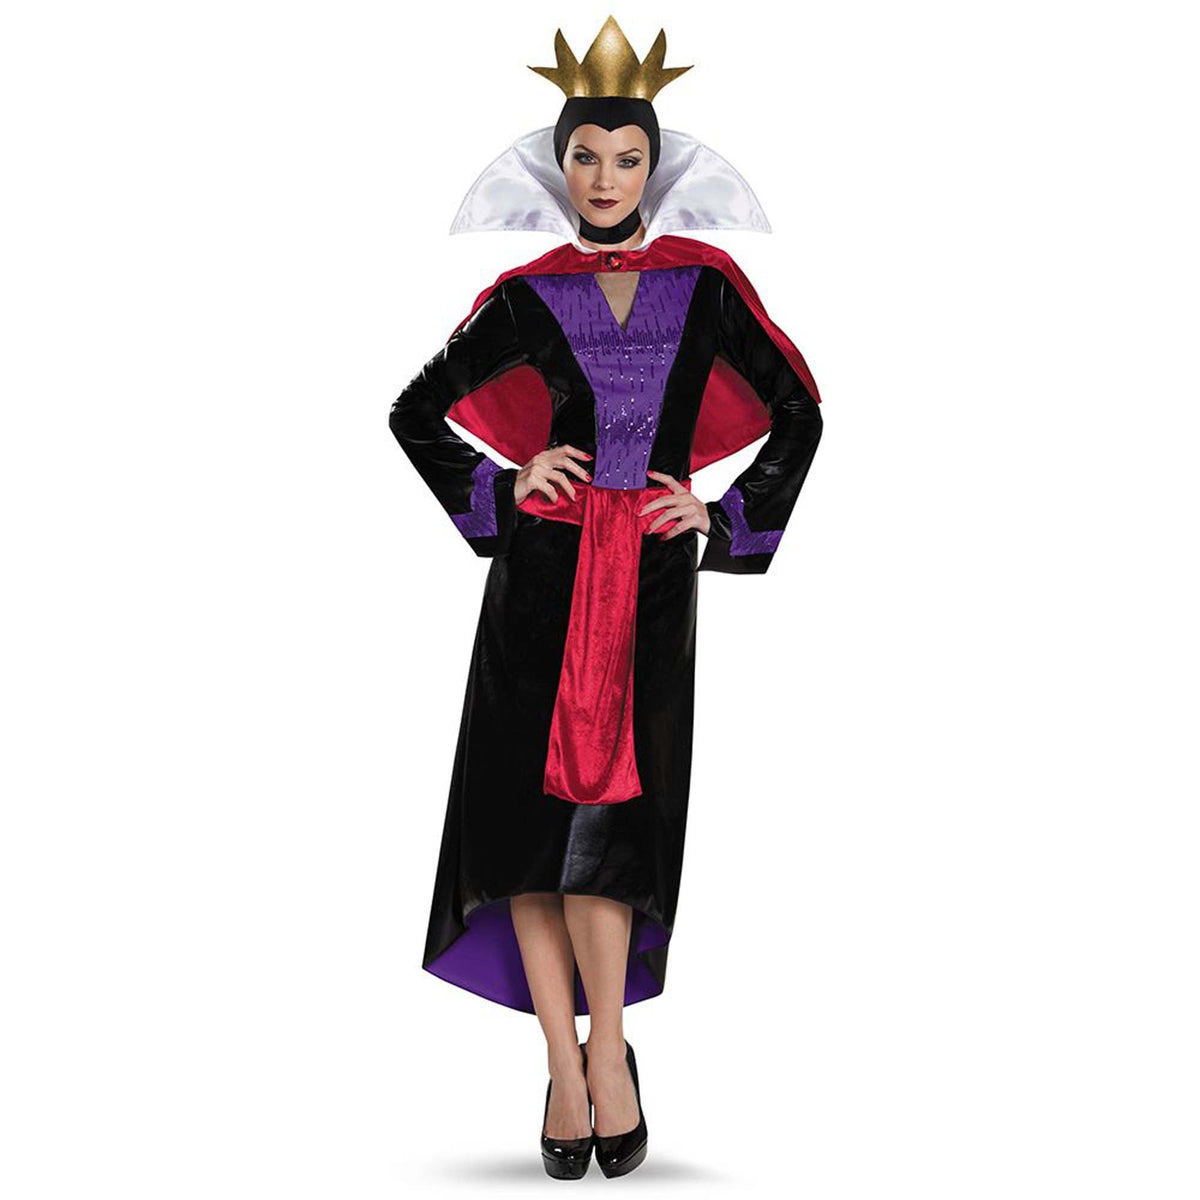 DISGUISE (TOY-SPORT) Costumes Disney Snow White Evil QueenDeluxe Costume for Adults, Black and Purple Dress